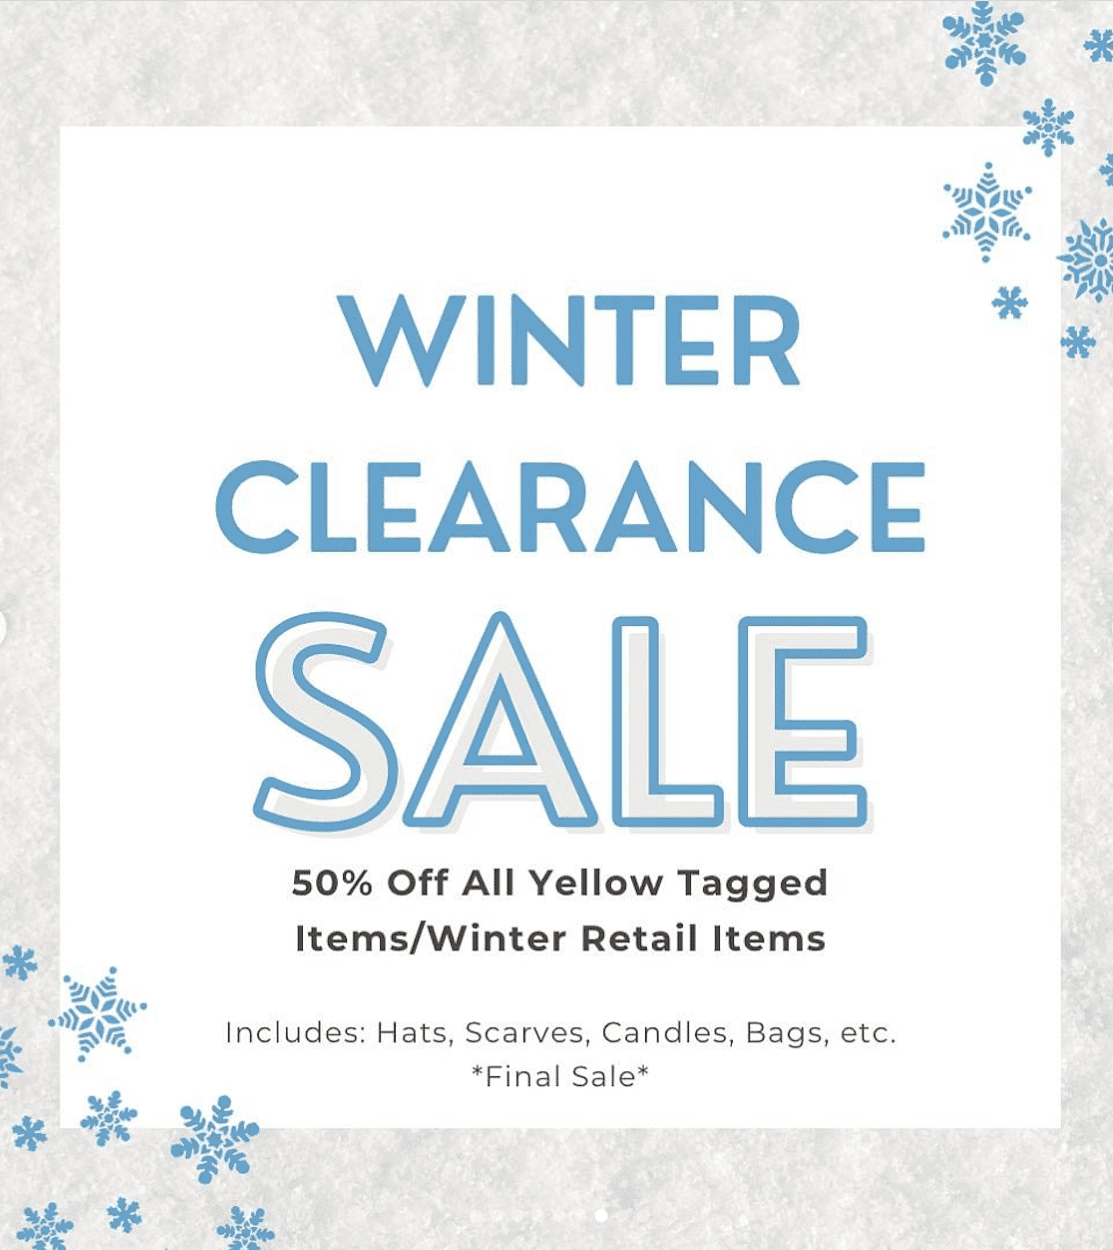 Winter Clearance Sale poster with details on discounted items and snowflake border.